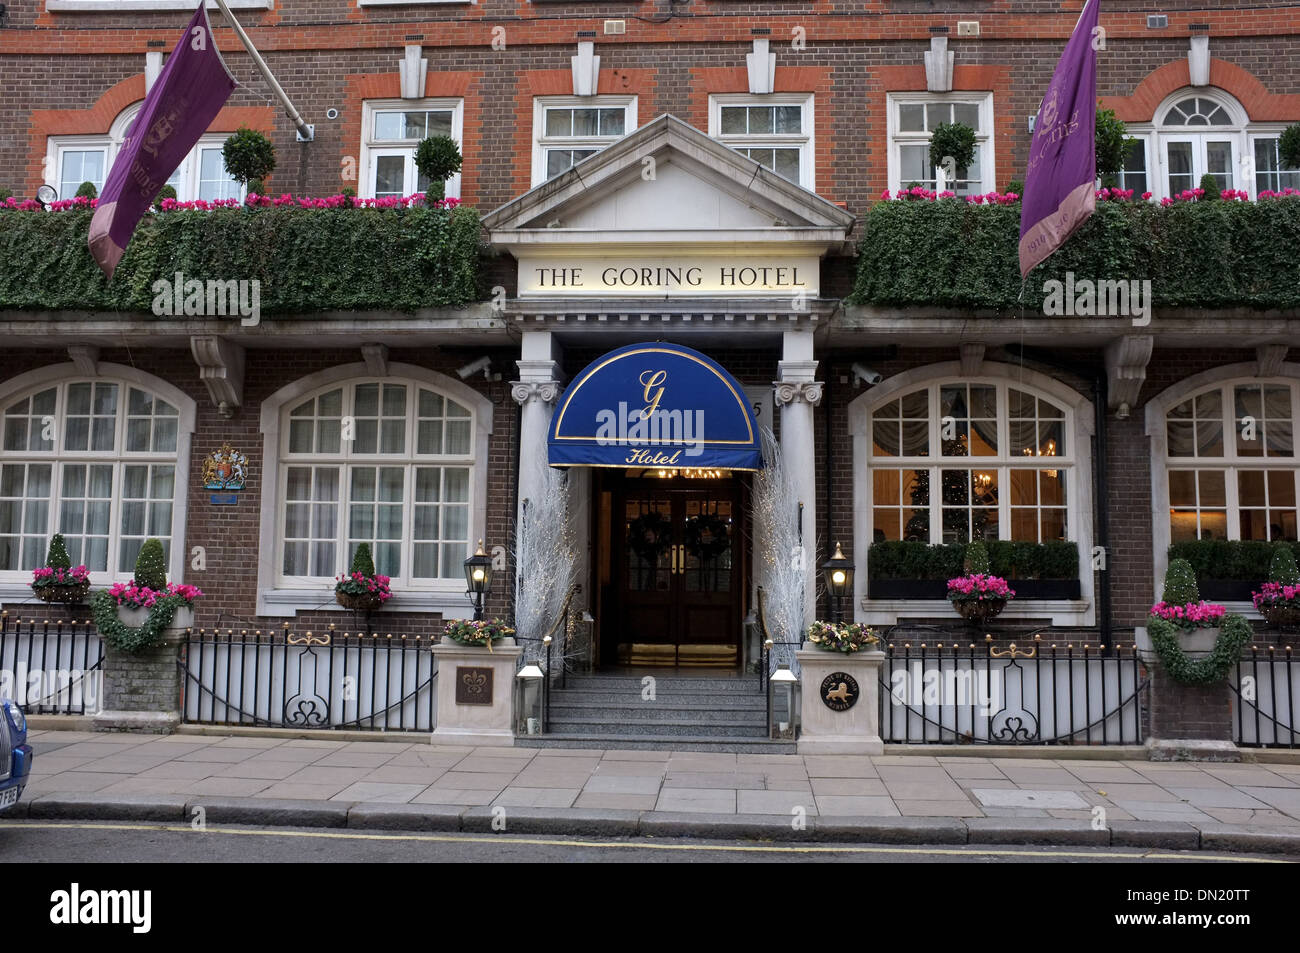 Hotel staff help guests as they arrive at the Goring Hotel where, News  Photo - Getty Images